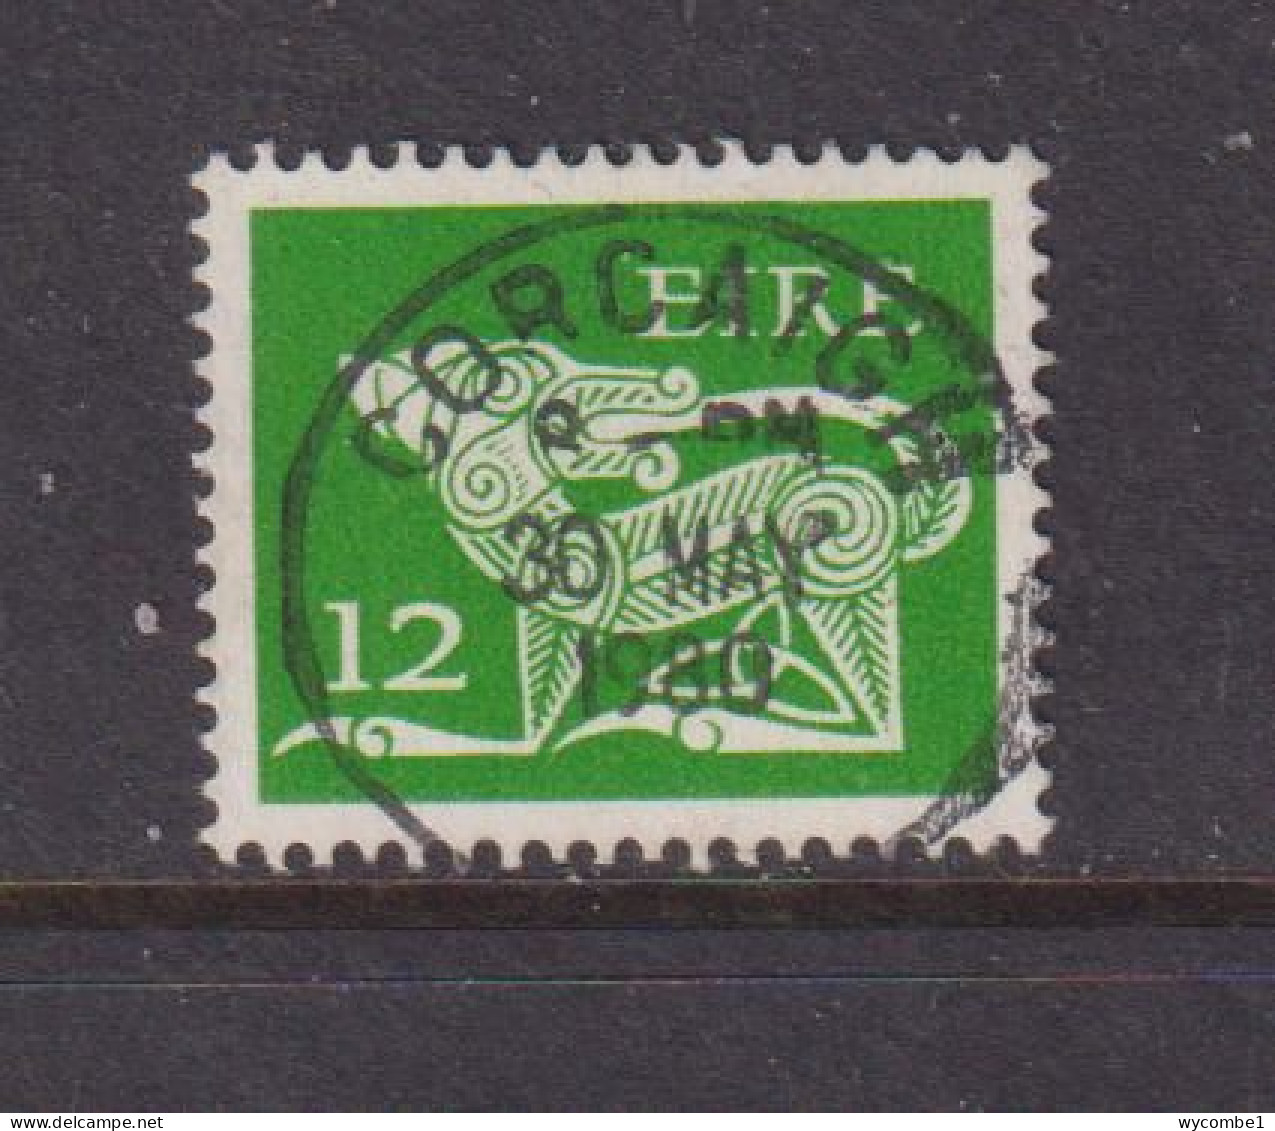 IRELAND - 1971  Decimal Currency Definitives  12p Used As Scan - Oblitérés